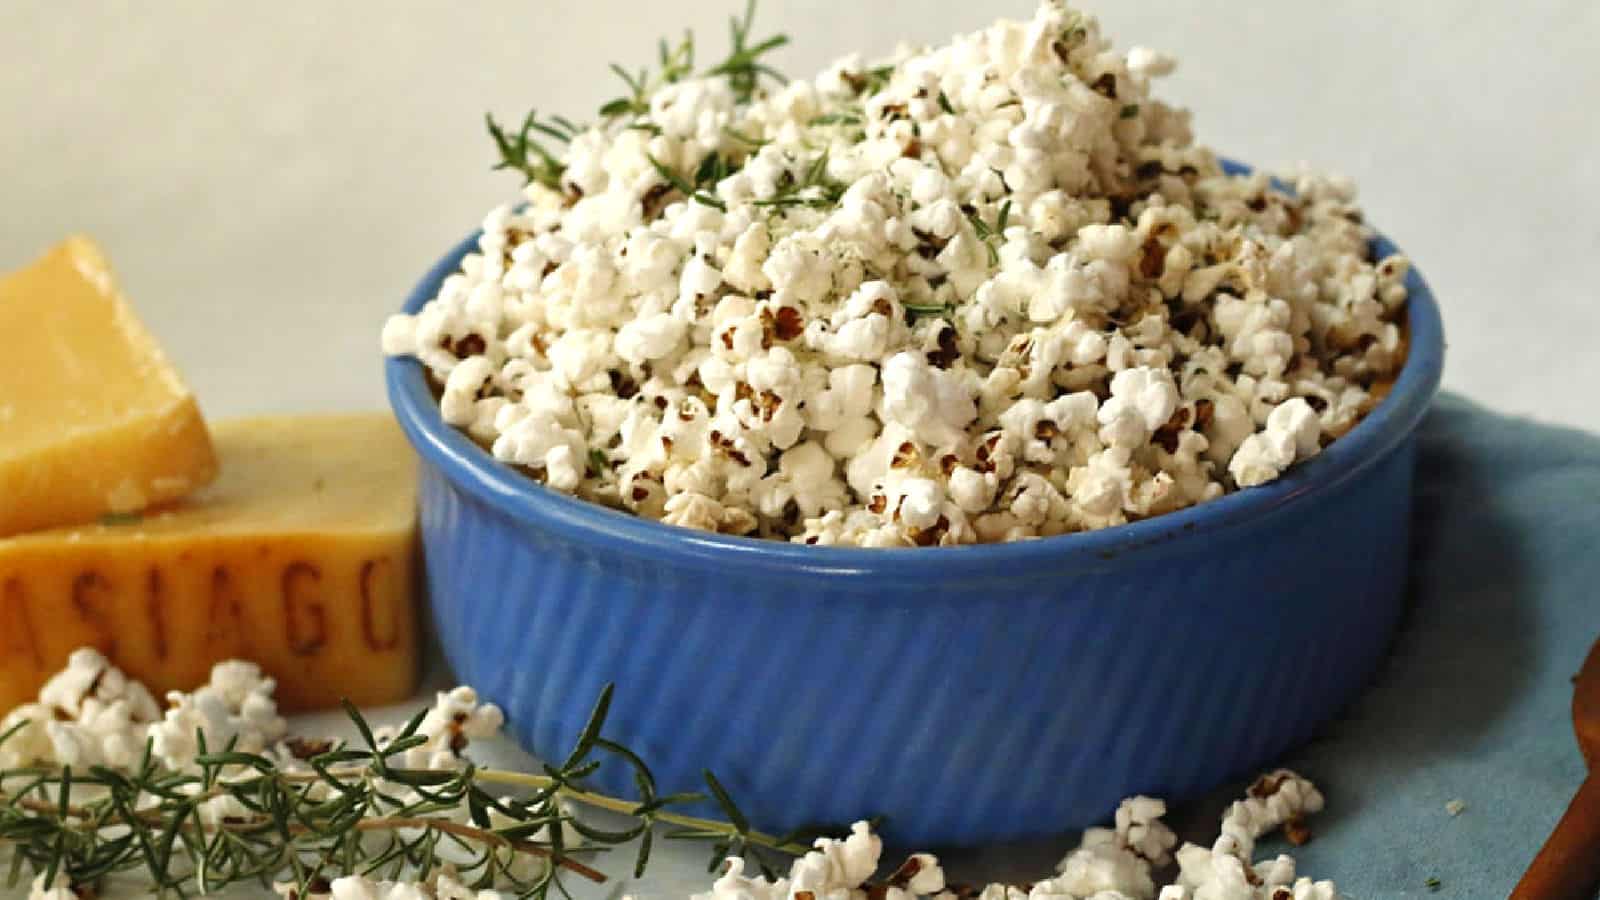 Popcorn with rosemary and Asiago cheese in a blue bowl.